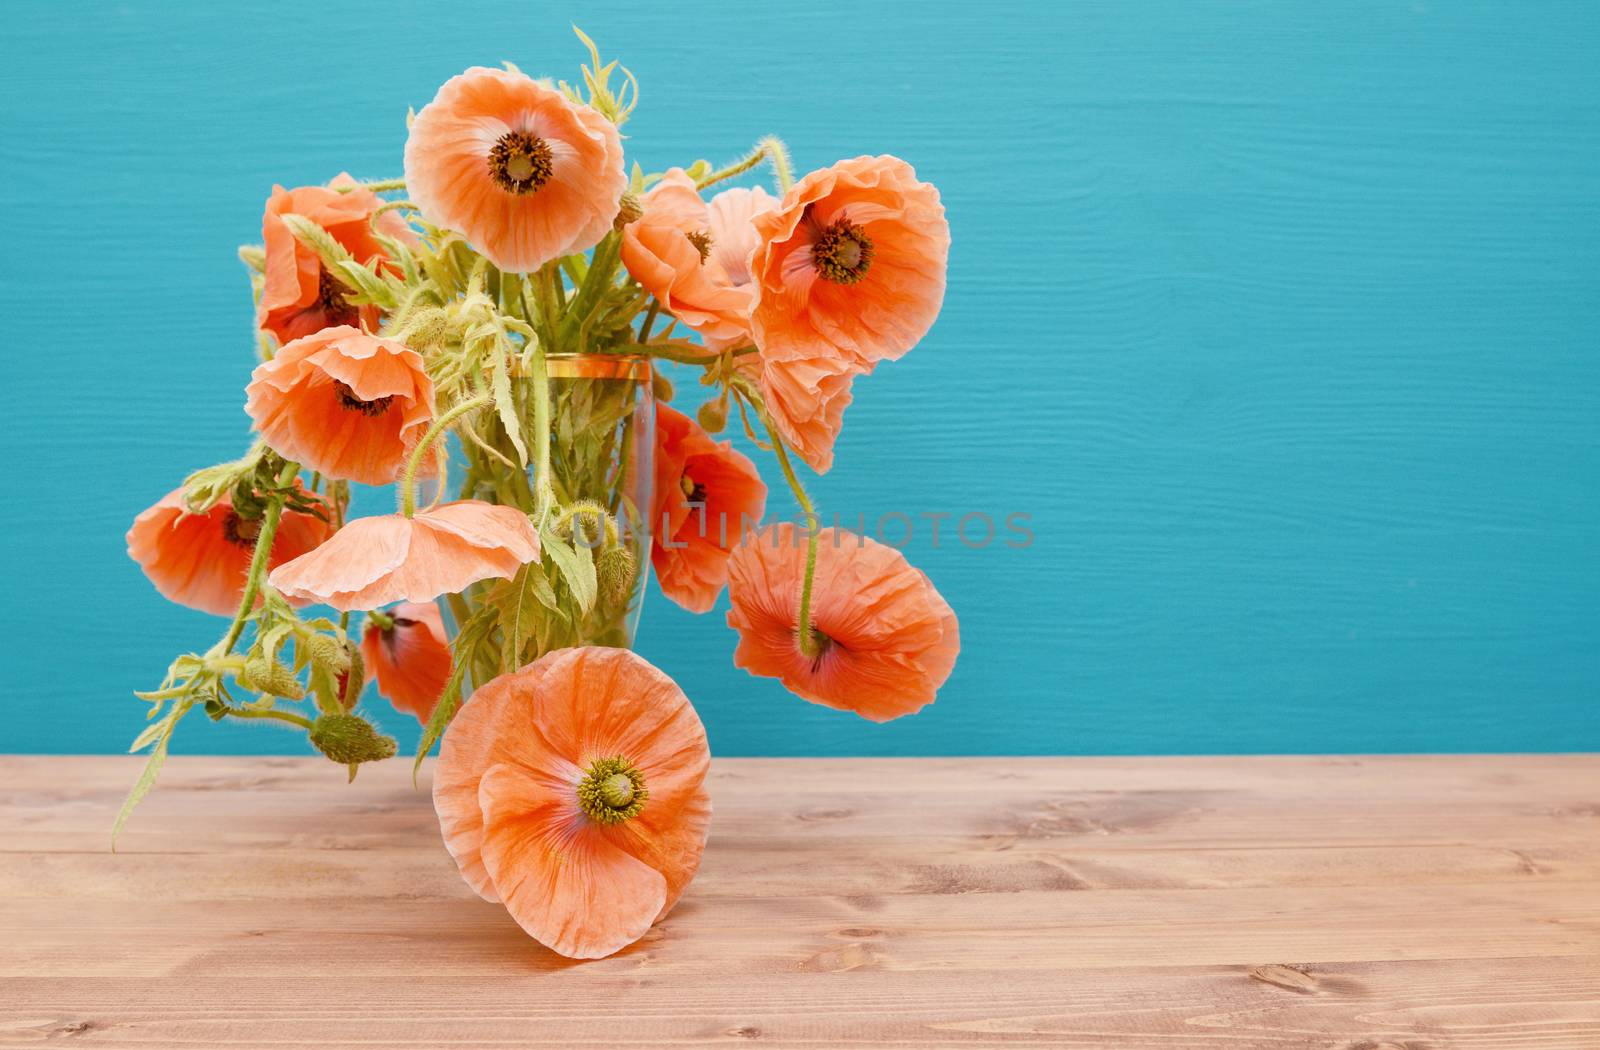 Numerous beautiful cut pink poppies with long winding stems by sarahdoow